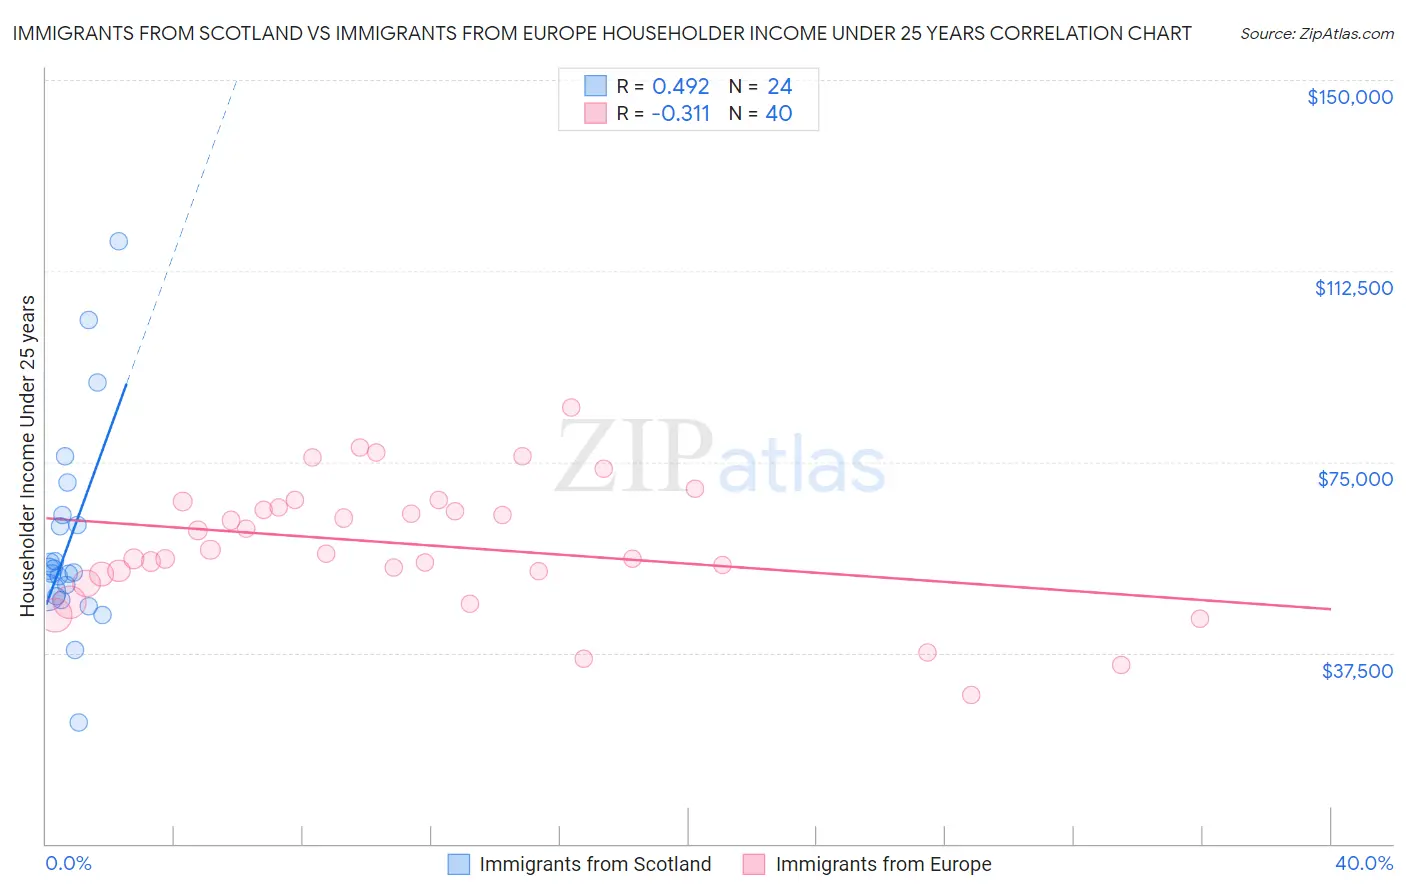 Immigrants from Scotland vs Immigrants from Europe Householder Income Under 25 years